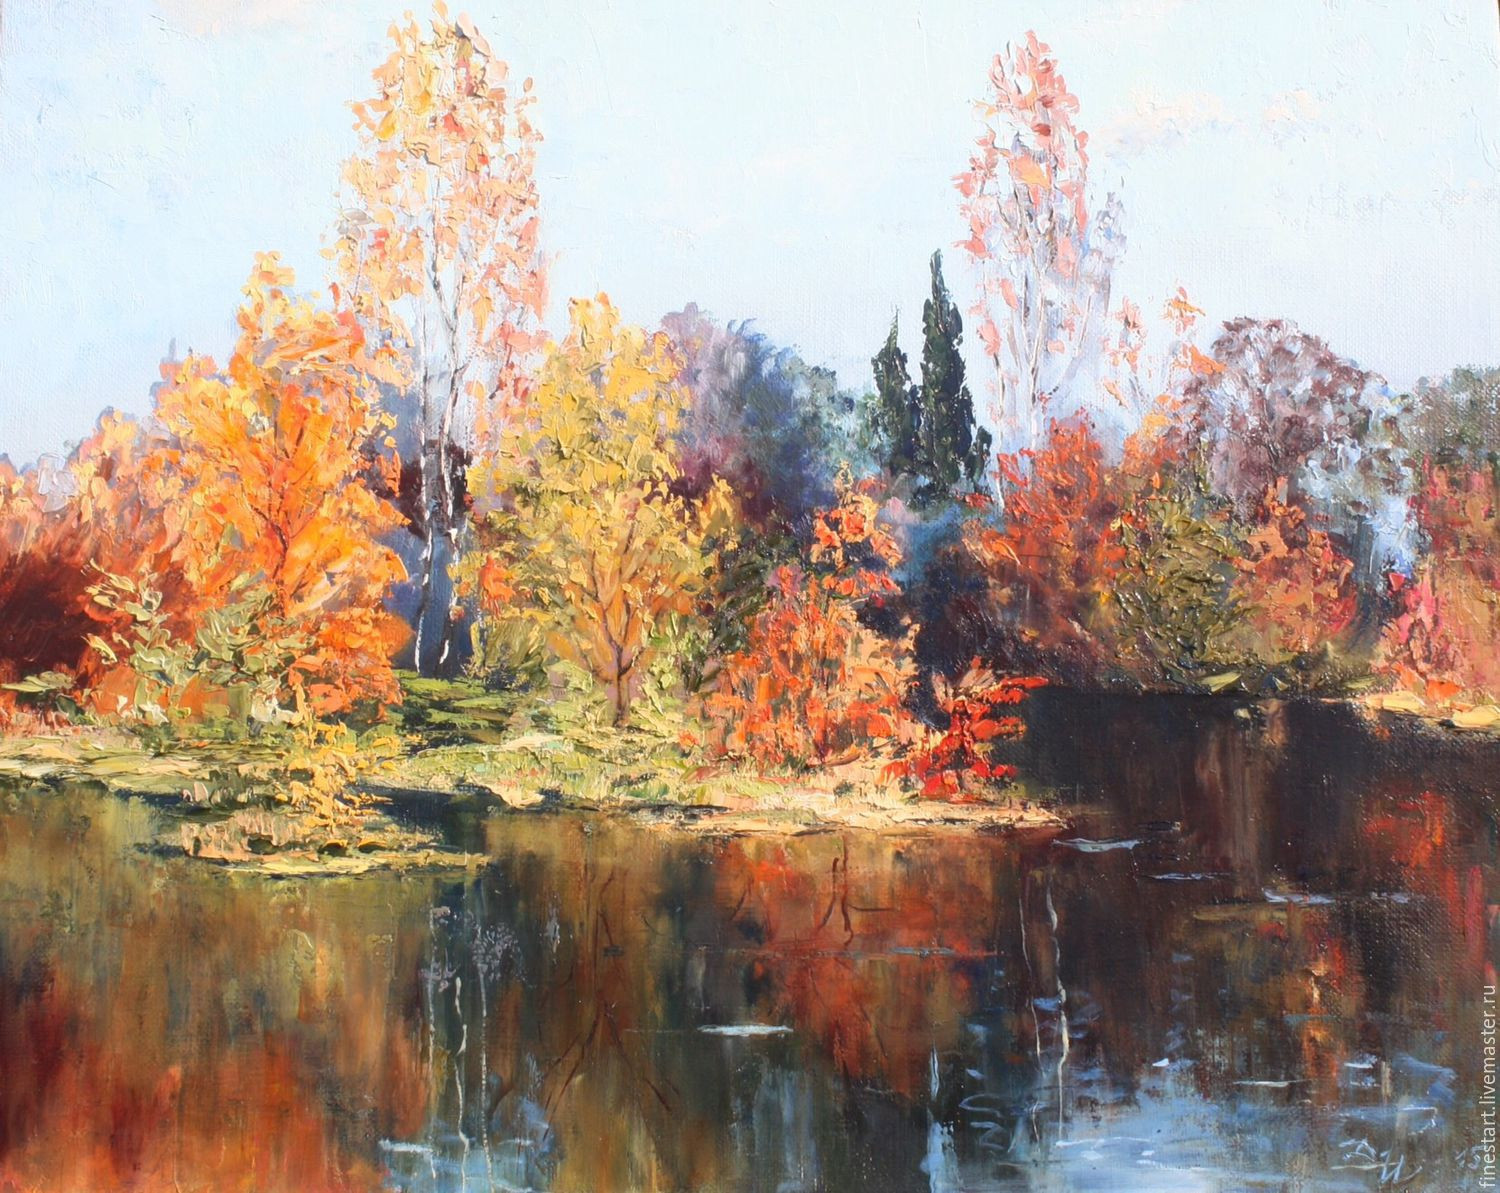 Landscape Oil Painting
 Oil painting landscape Autumn Oil on Canvas Impressionism